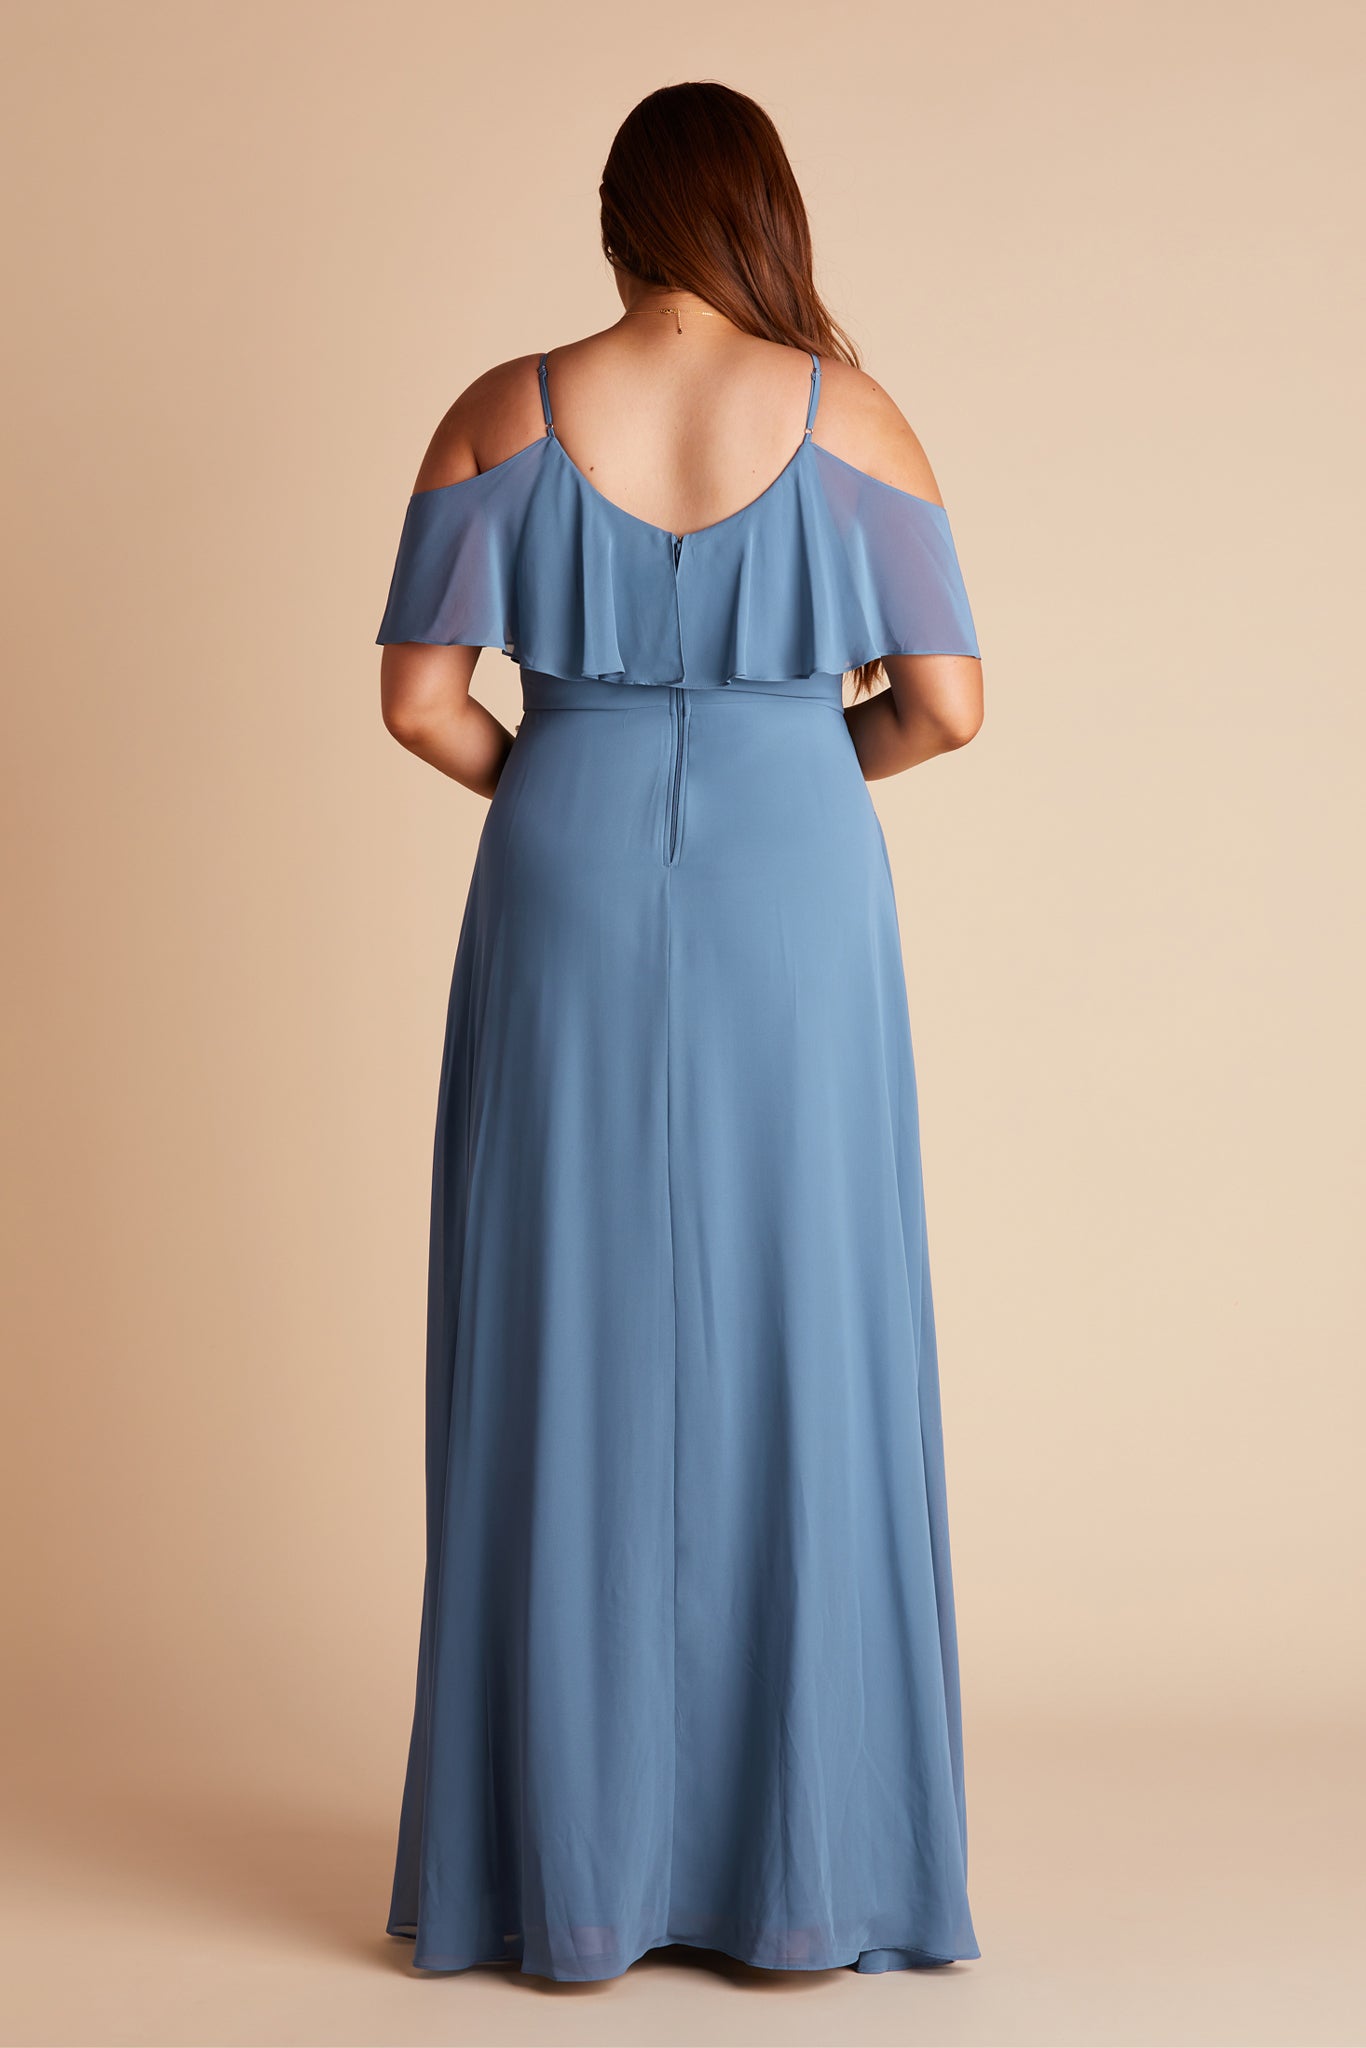 Jane convertible plus size bridesmaid dress with slit in twilight blue chiffon by Birdy Grey, back view